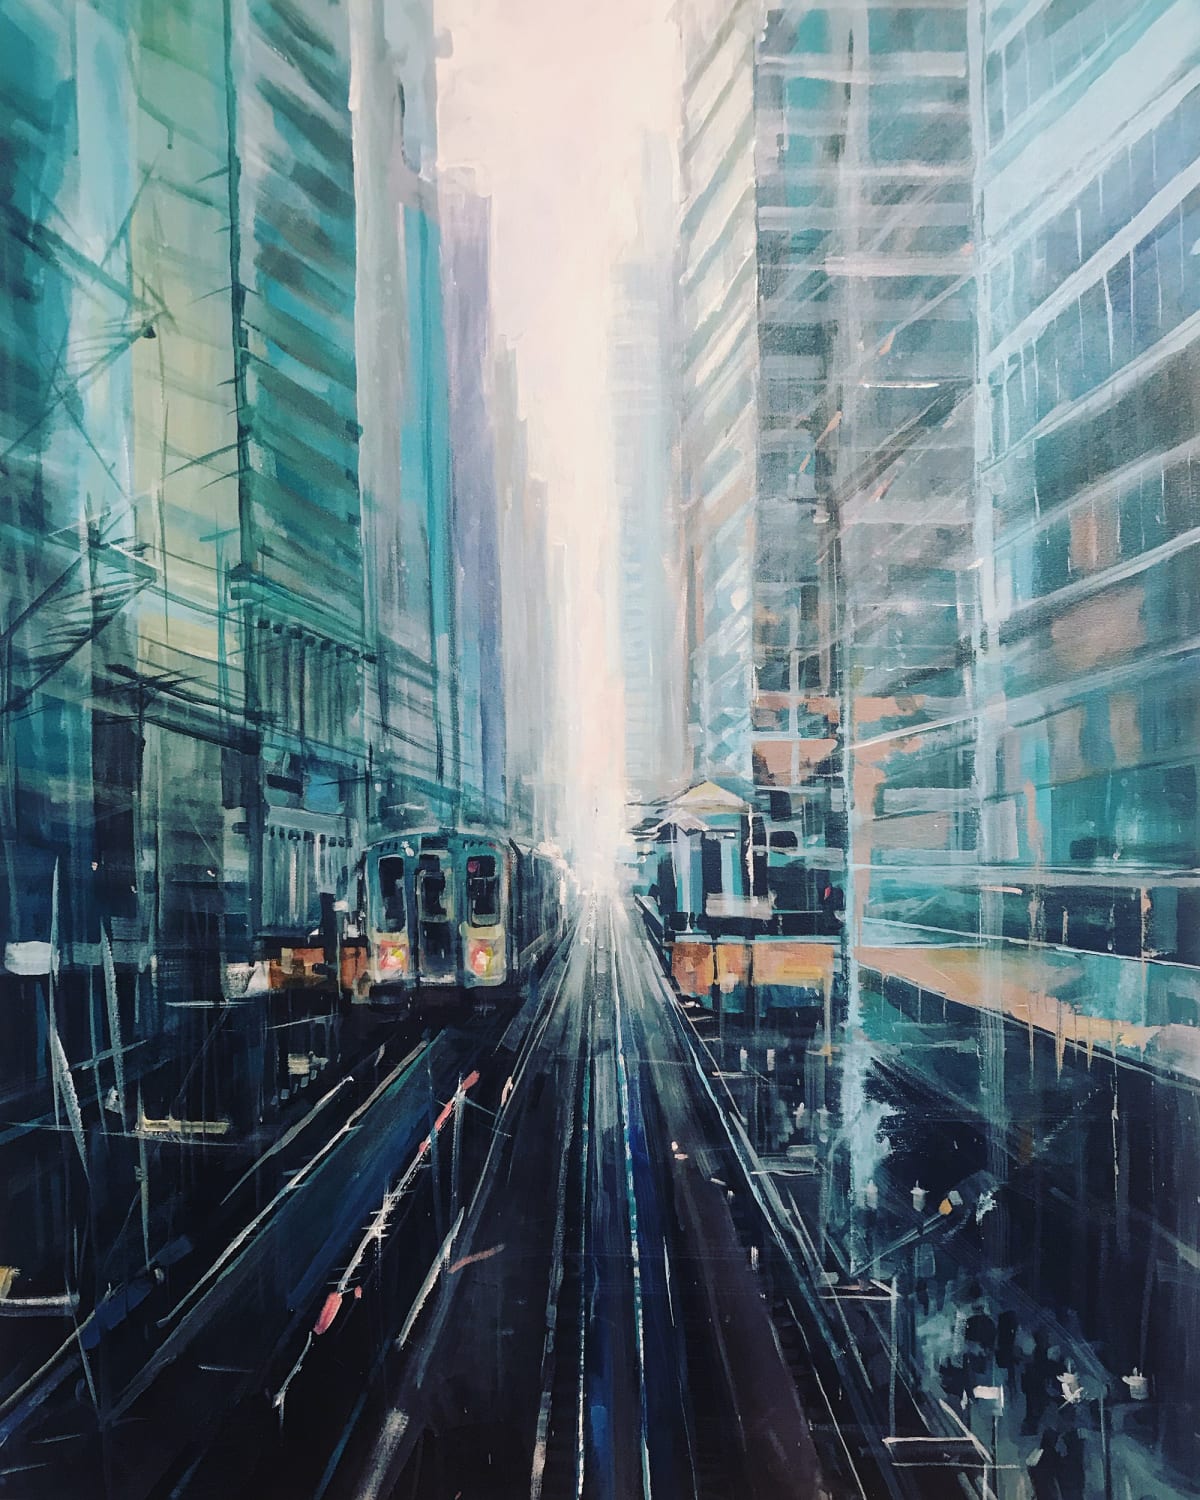 Plein Air Oil Paintings of Chicago Architecture, Parks, and Landmarks by Luna Prysiazhniuk — Colossal